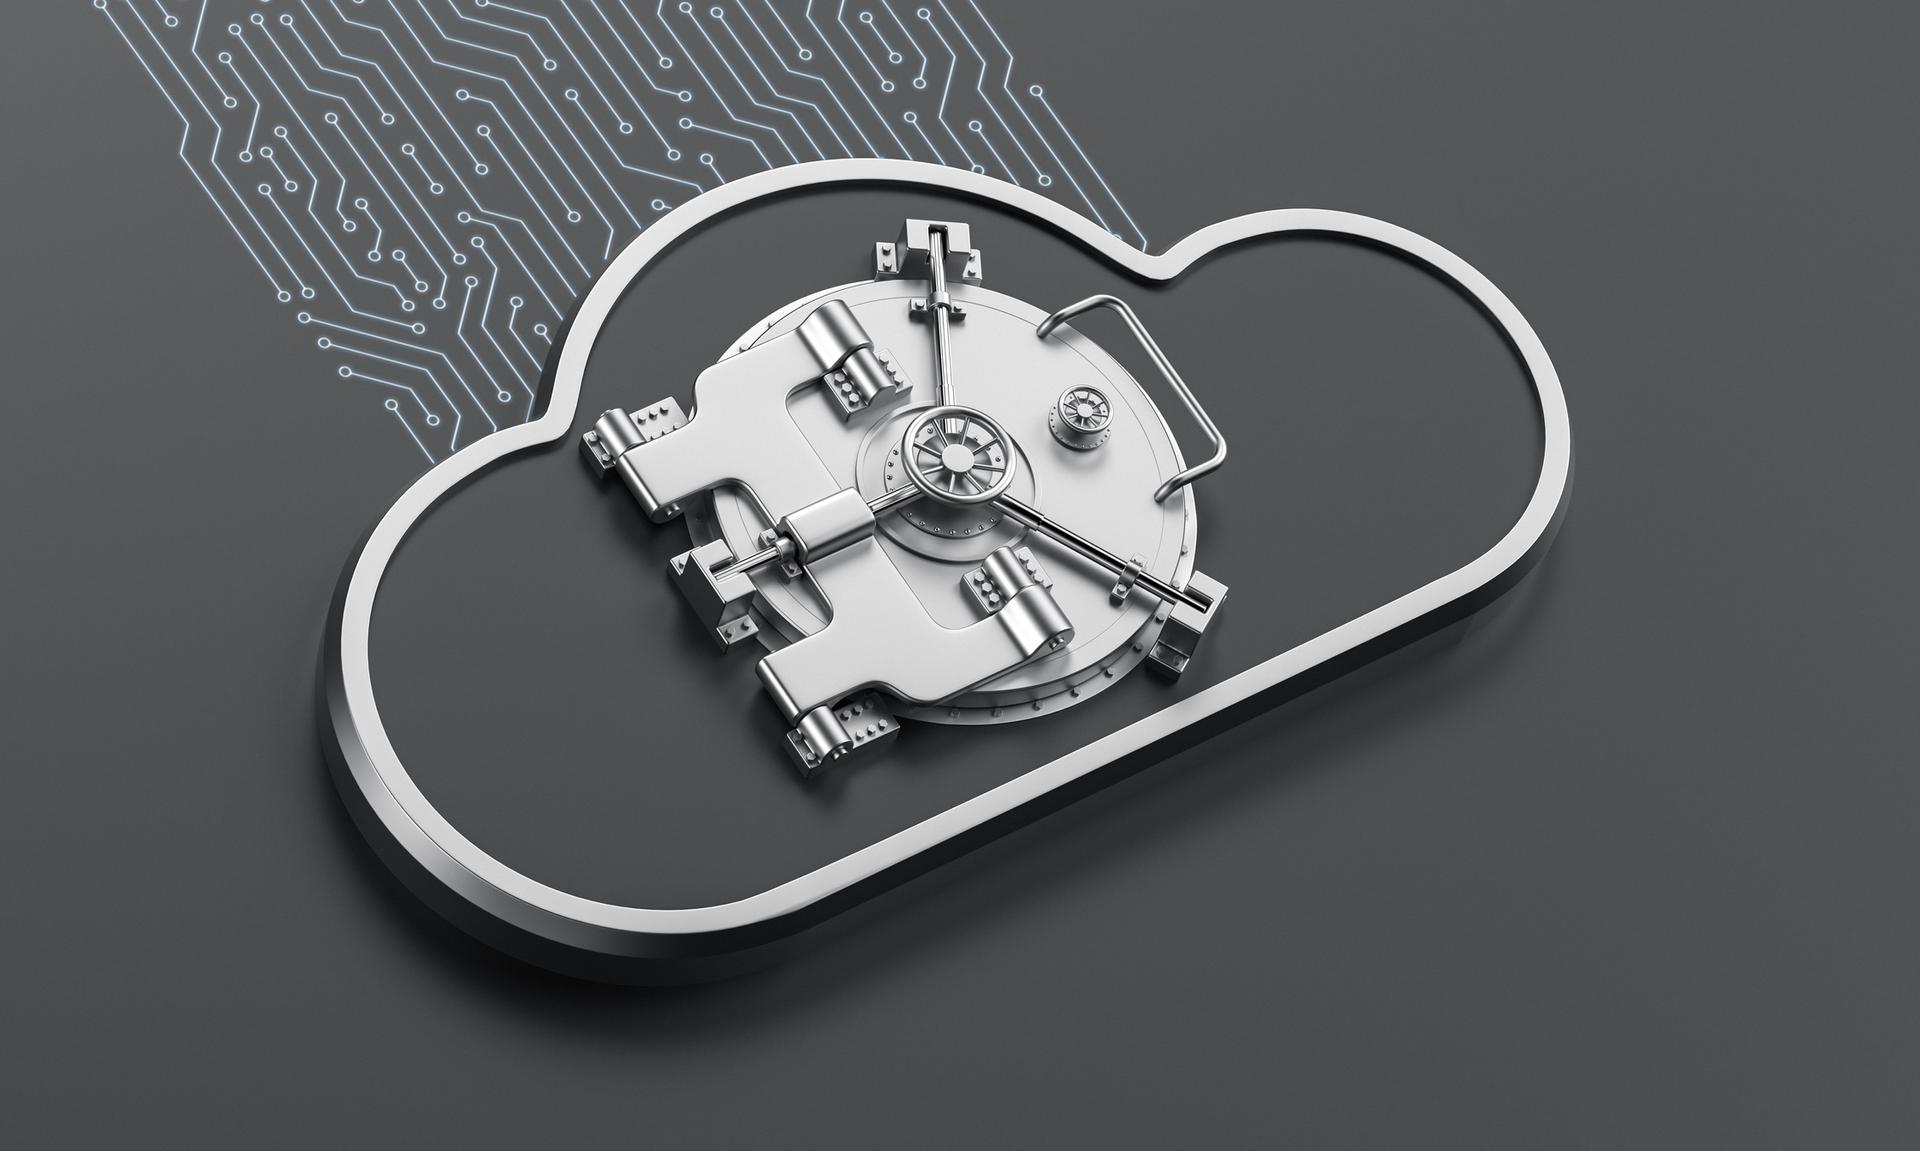 Threat actors have been using Microsoft’s third-party app verification process to target the cloud environments of business and financial executives, according to new research out this morning from Proofpoint. (Credit: atomicstudio via Getty Images)